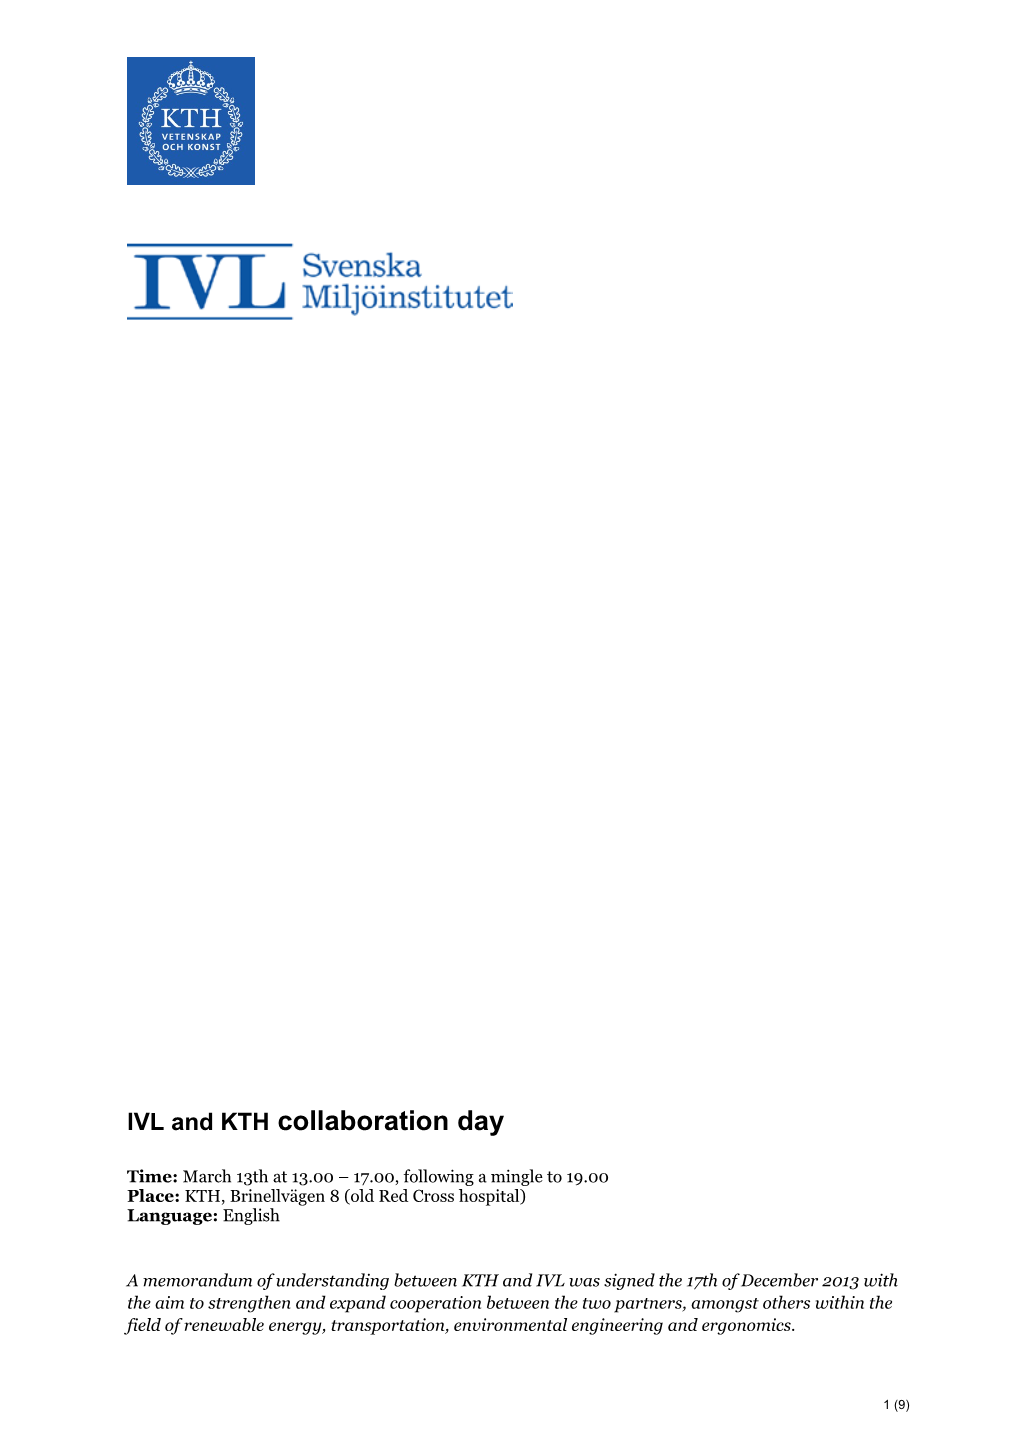 IVL and Kthcollaboration Day